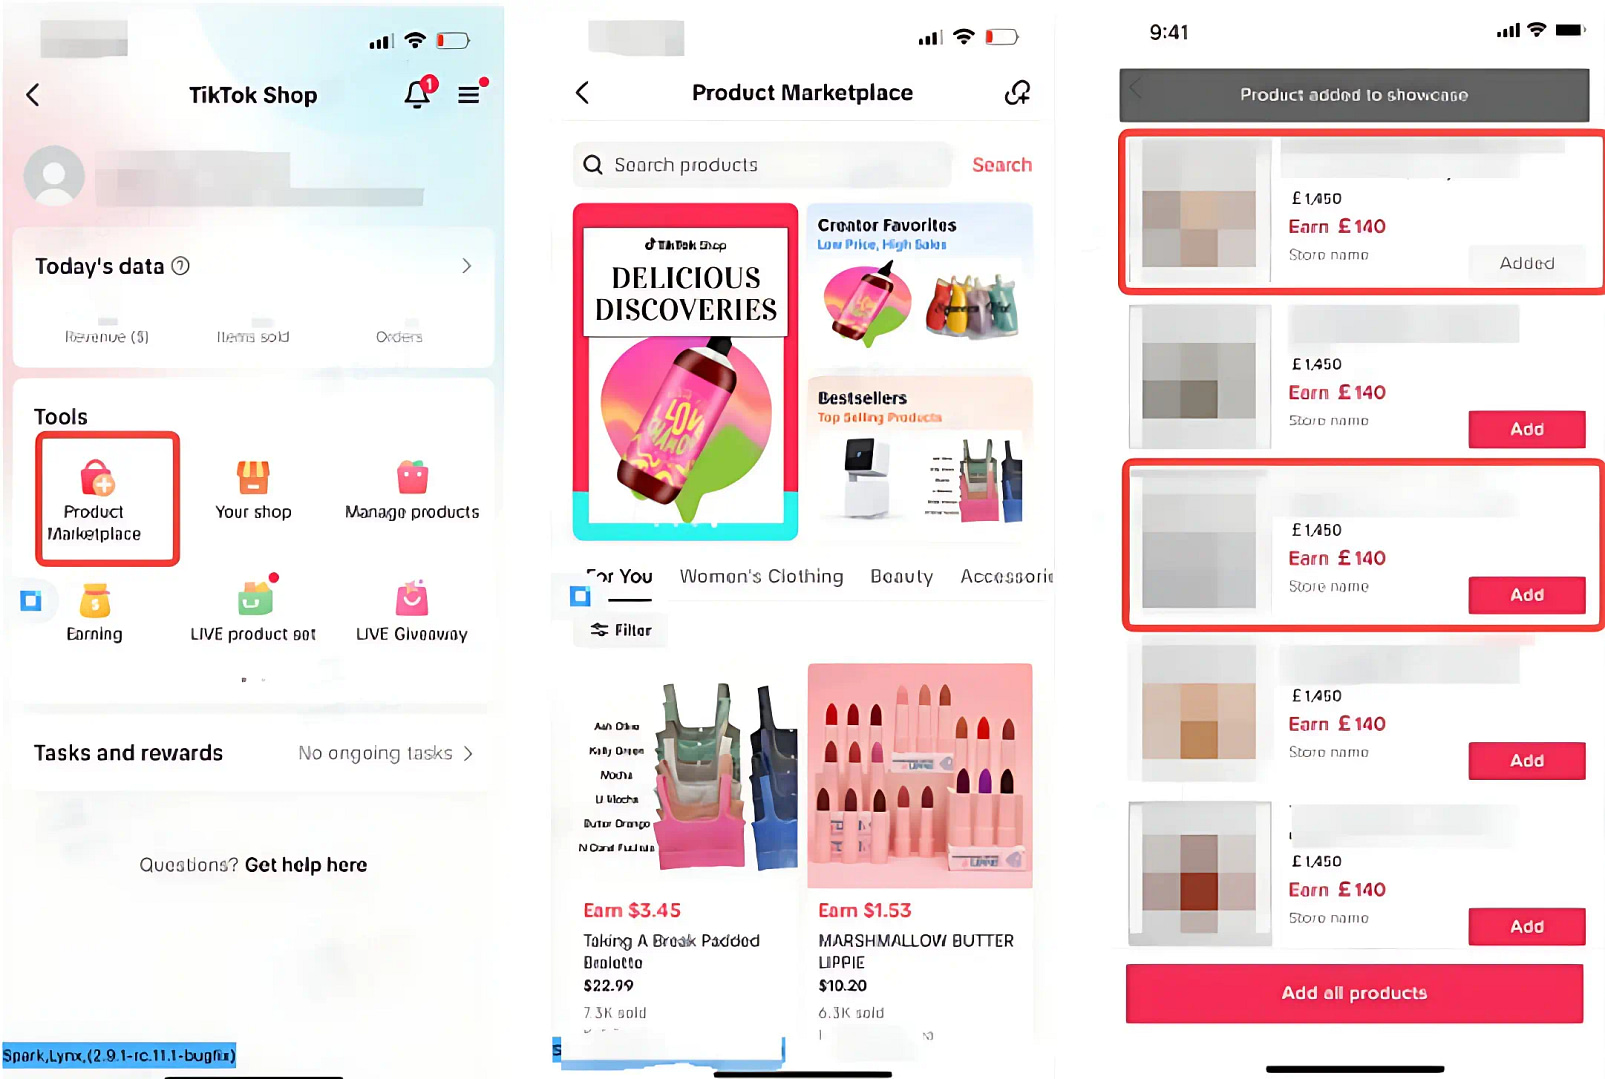 Add products by searching from product marketplace